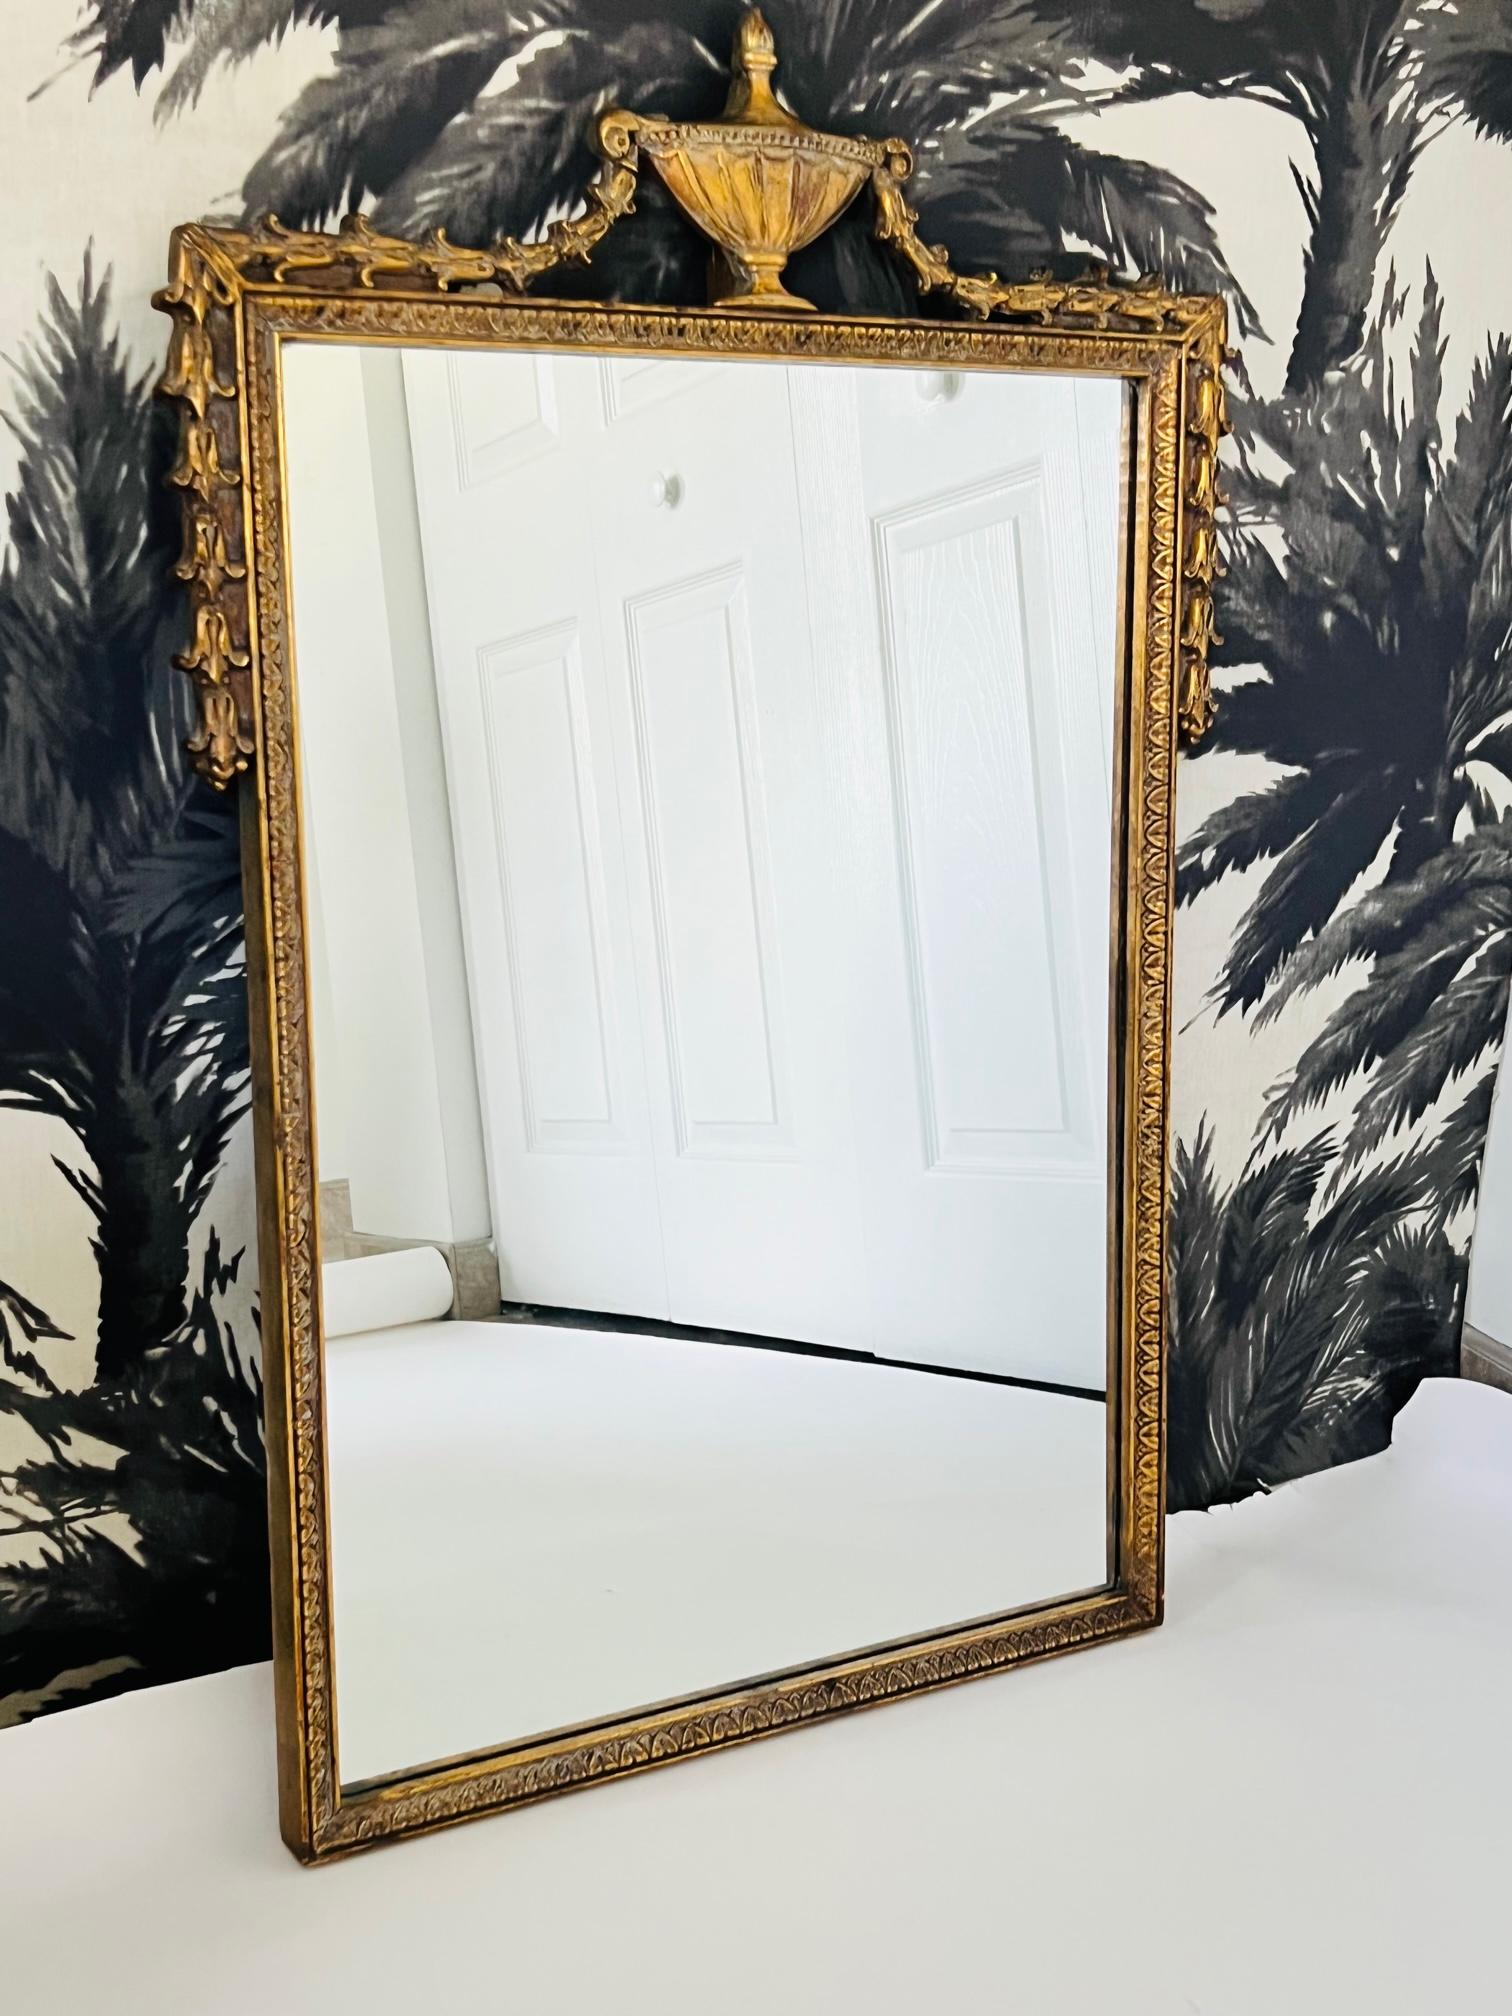 Hand-Carved Antique Neoclassical Giltwood Mirror with Hand Carved Frame, France, c. 1920's